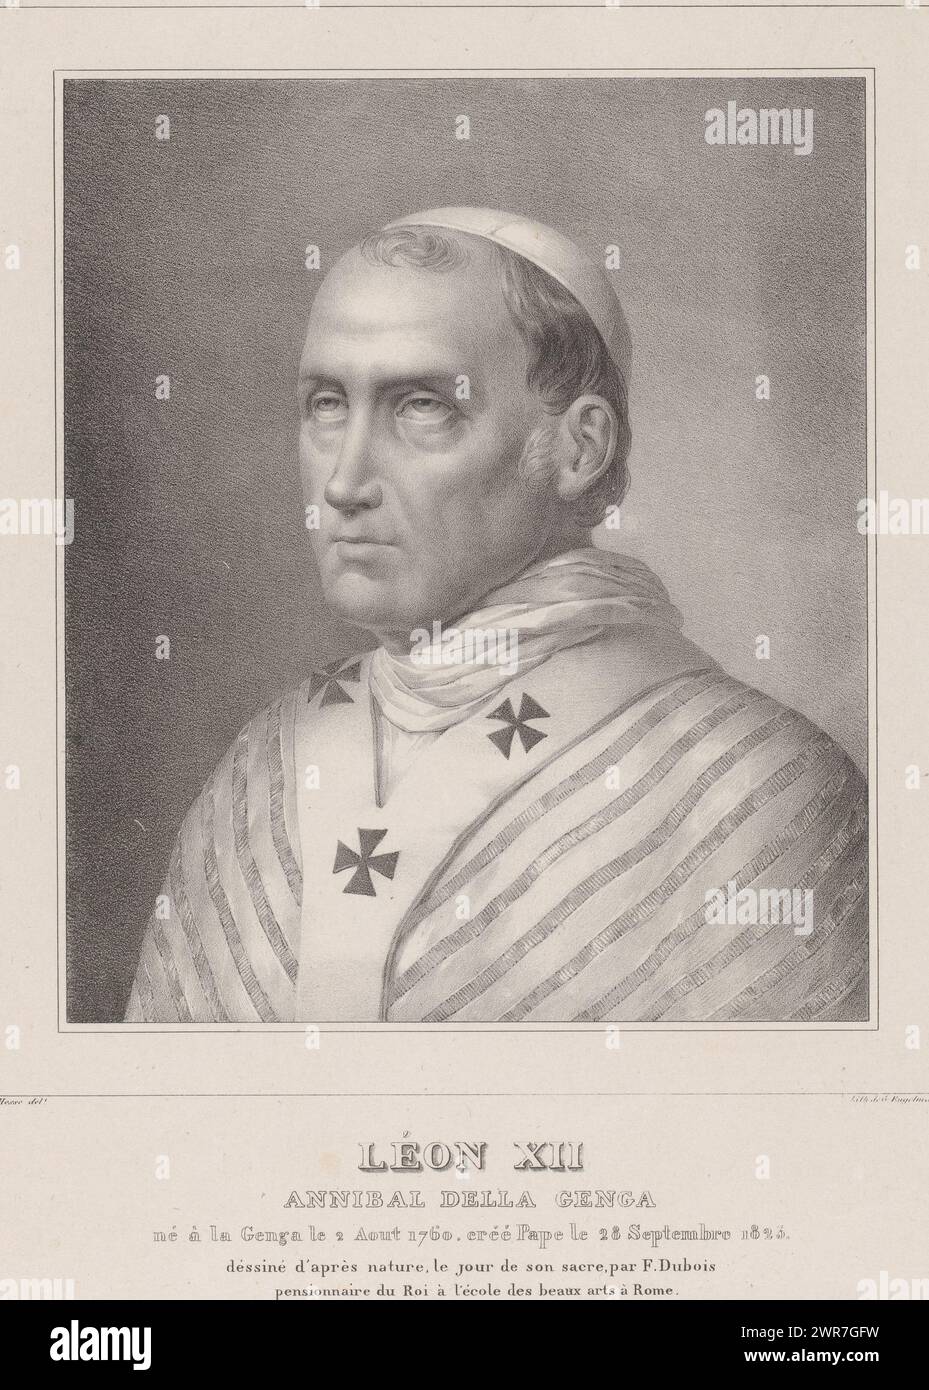 Portrait of Pope Leo XII, Léon XII, Annibal della Genga (title on object), print maker: Henri Joseph Hesse, after drawing by: François Dubois, printer: Gottfried Engelmann, after drawing by: Rome, printer: Paris, 1823, paper, height 535 mm × width 358 mm, print Stock Photo